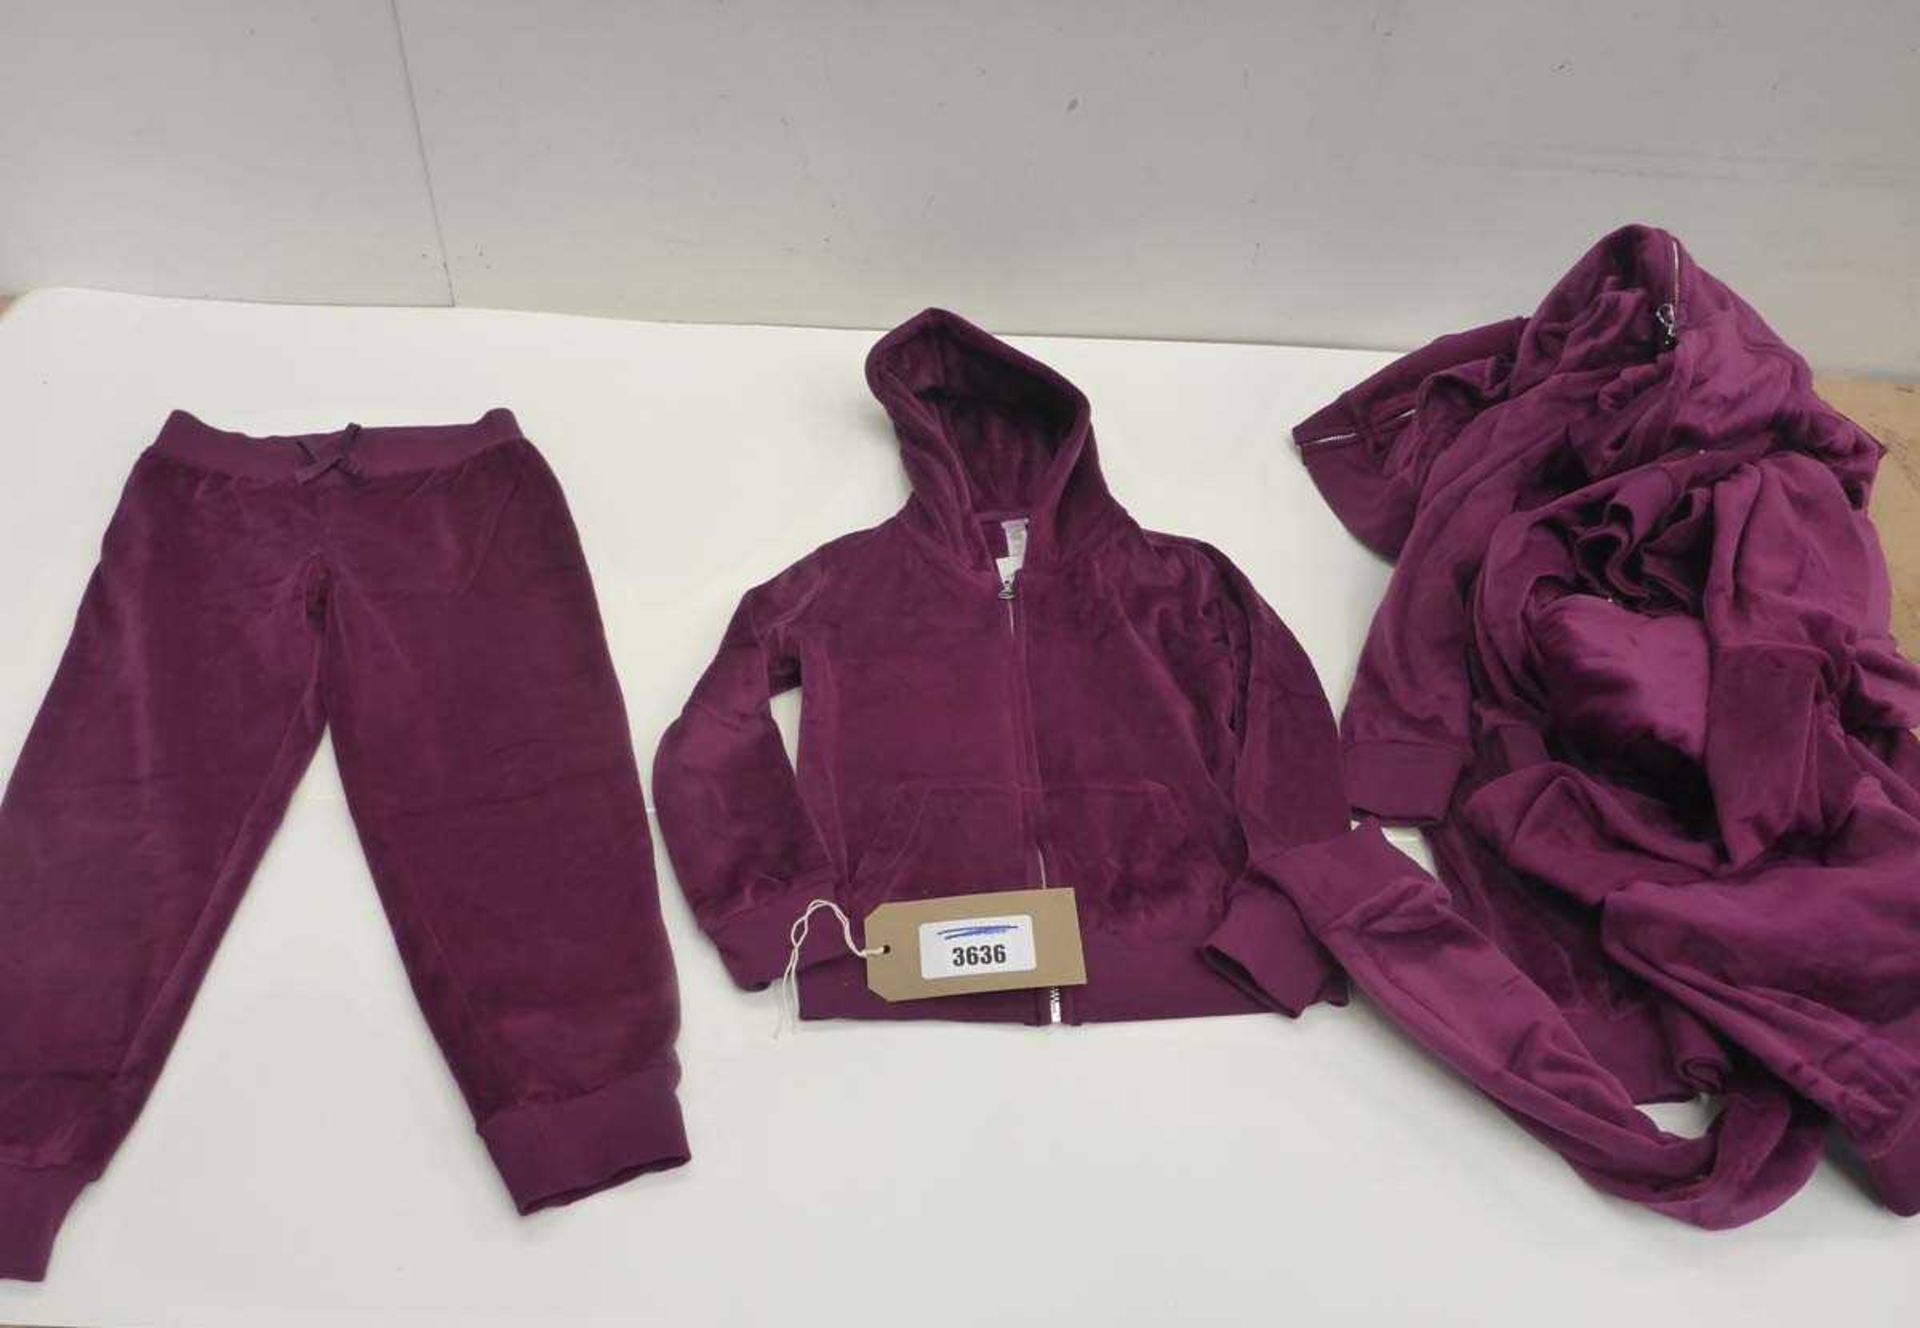 4 x Jezzie's Girls' velour 2 piece hooded lounge sets in purple in various sizes